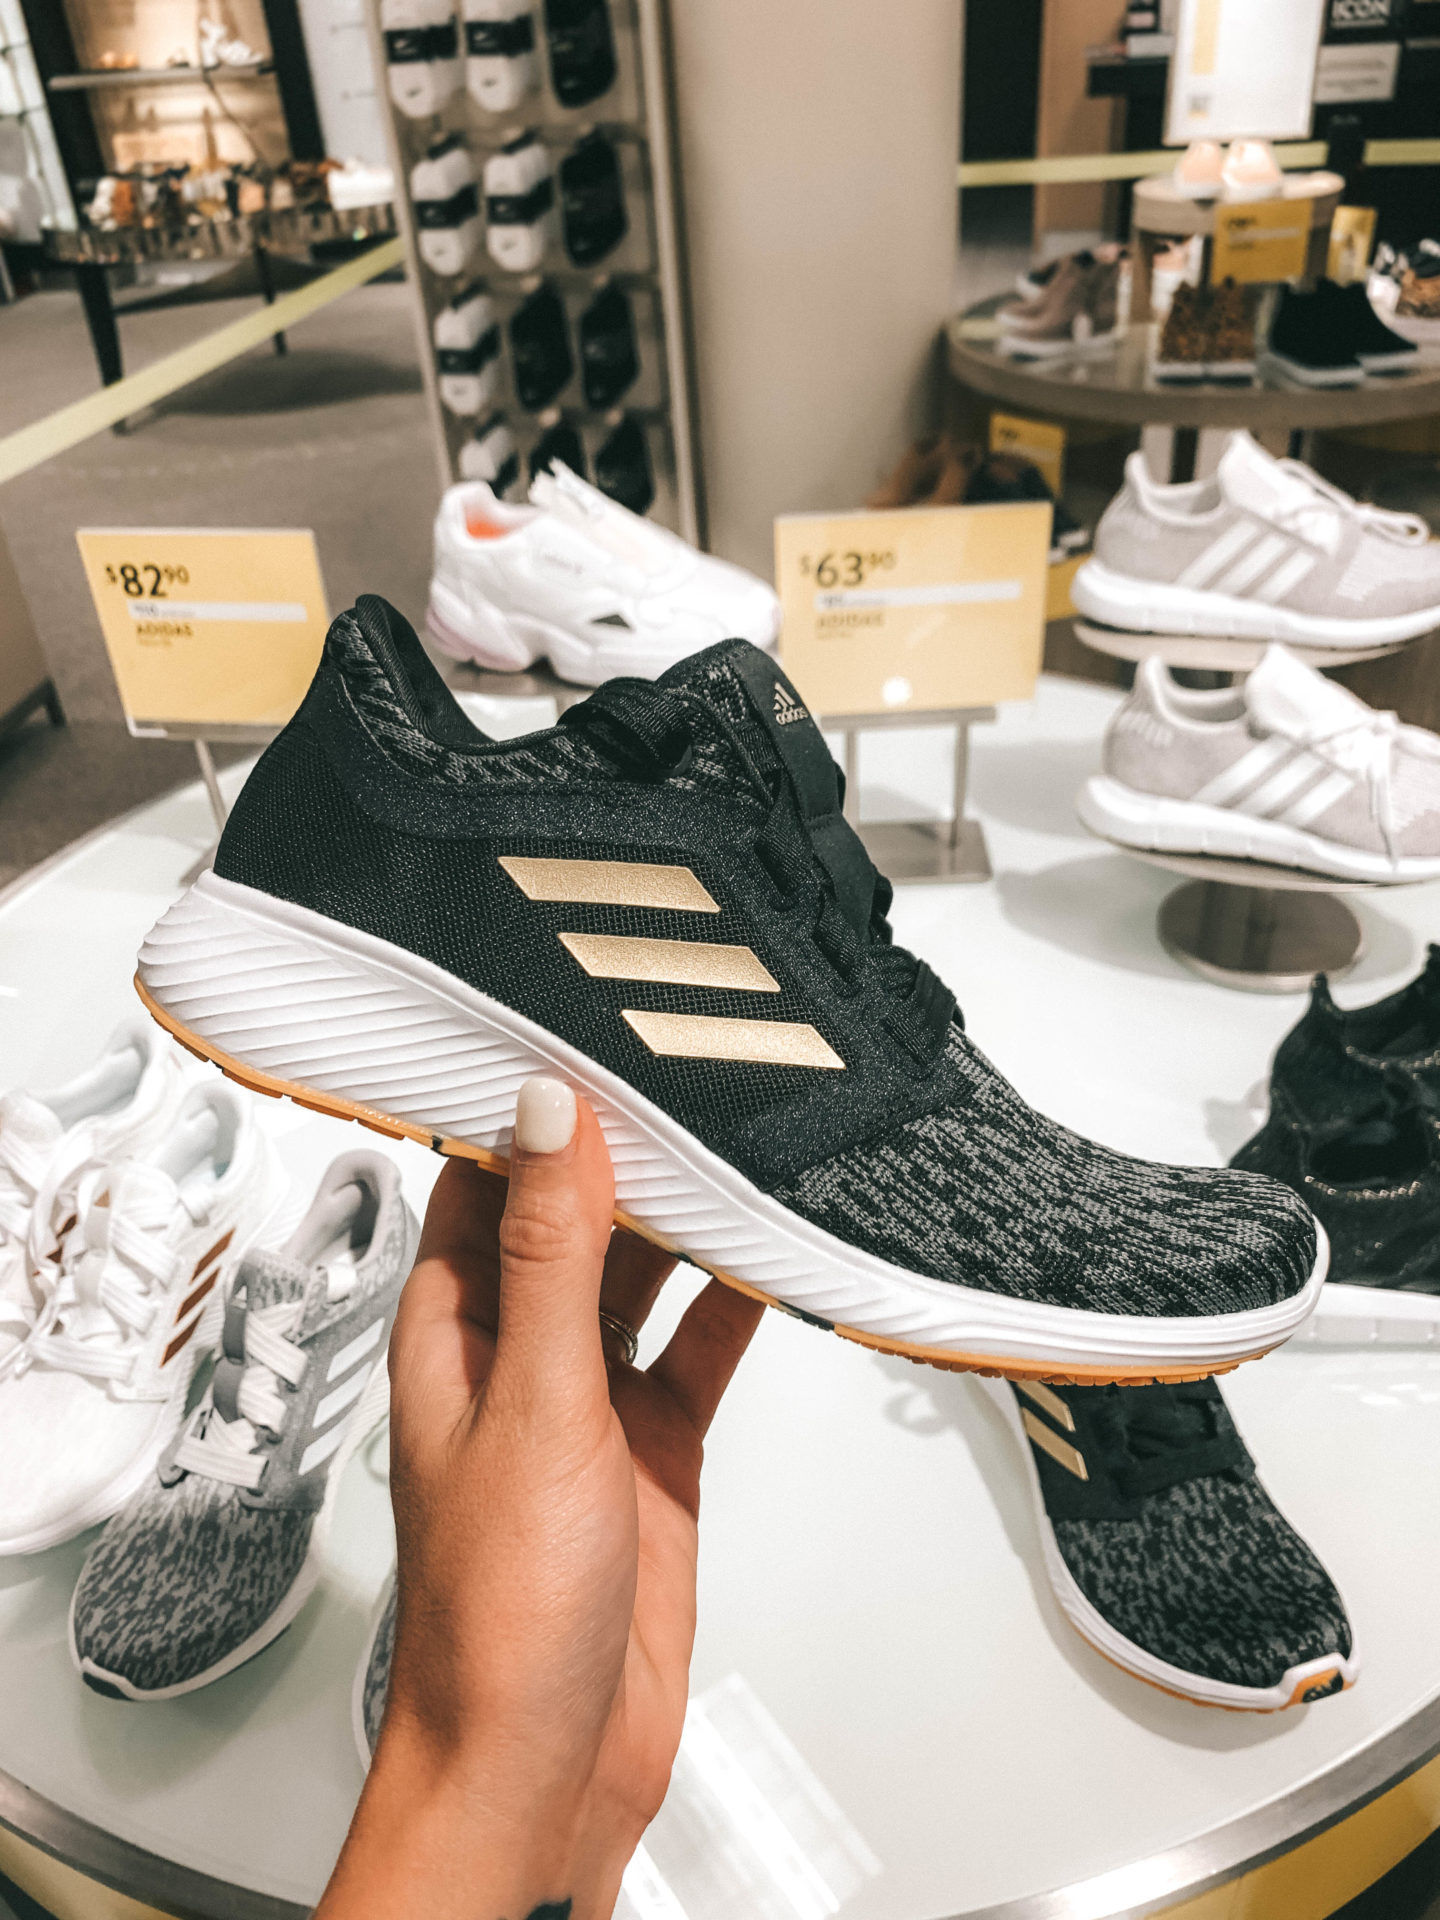 NSALE Adidas Black Gold Sneakers